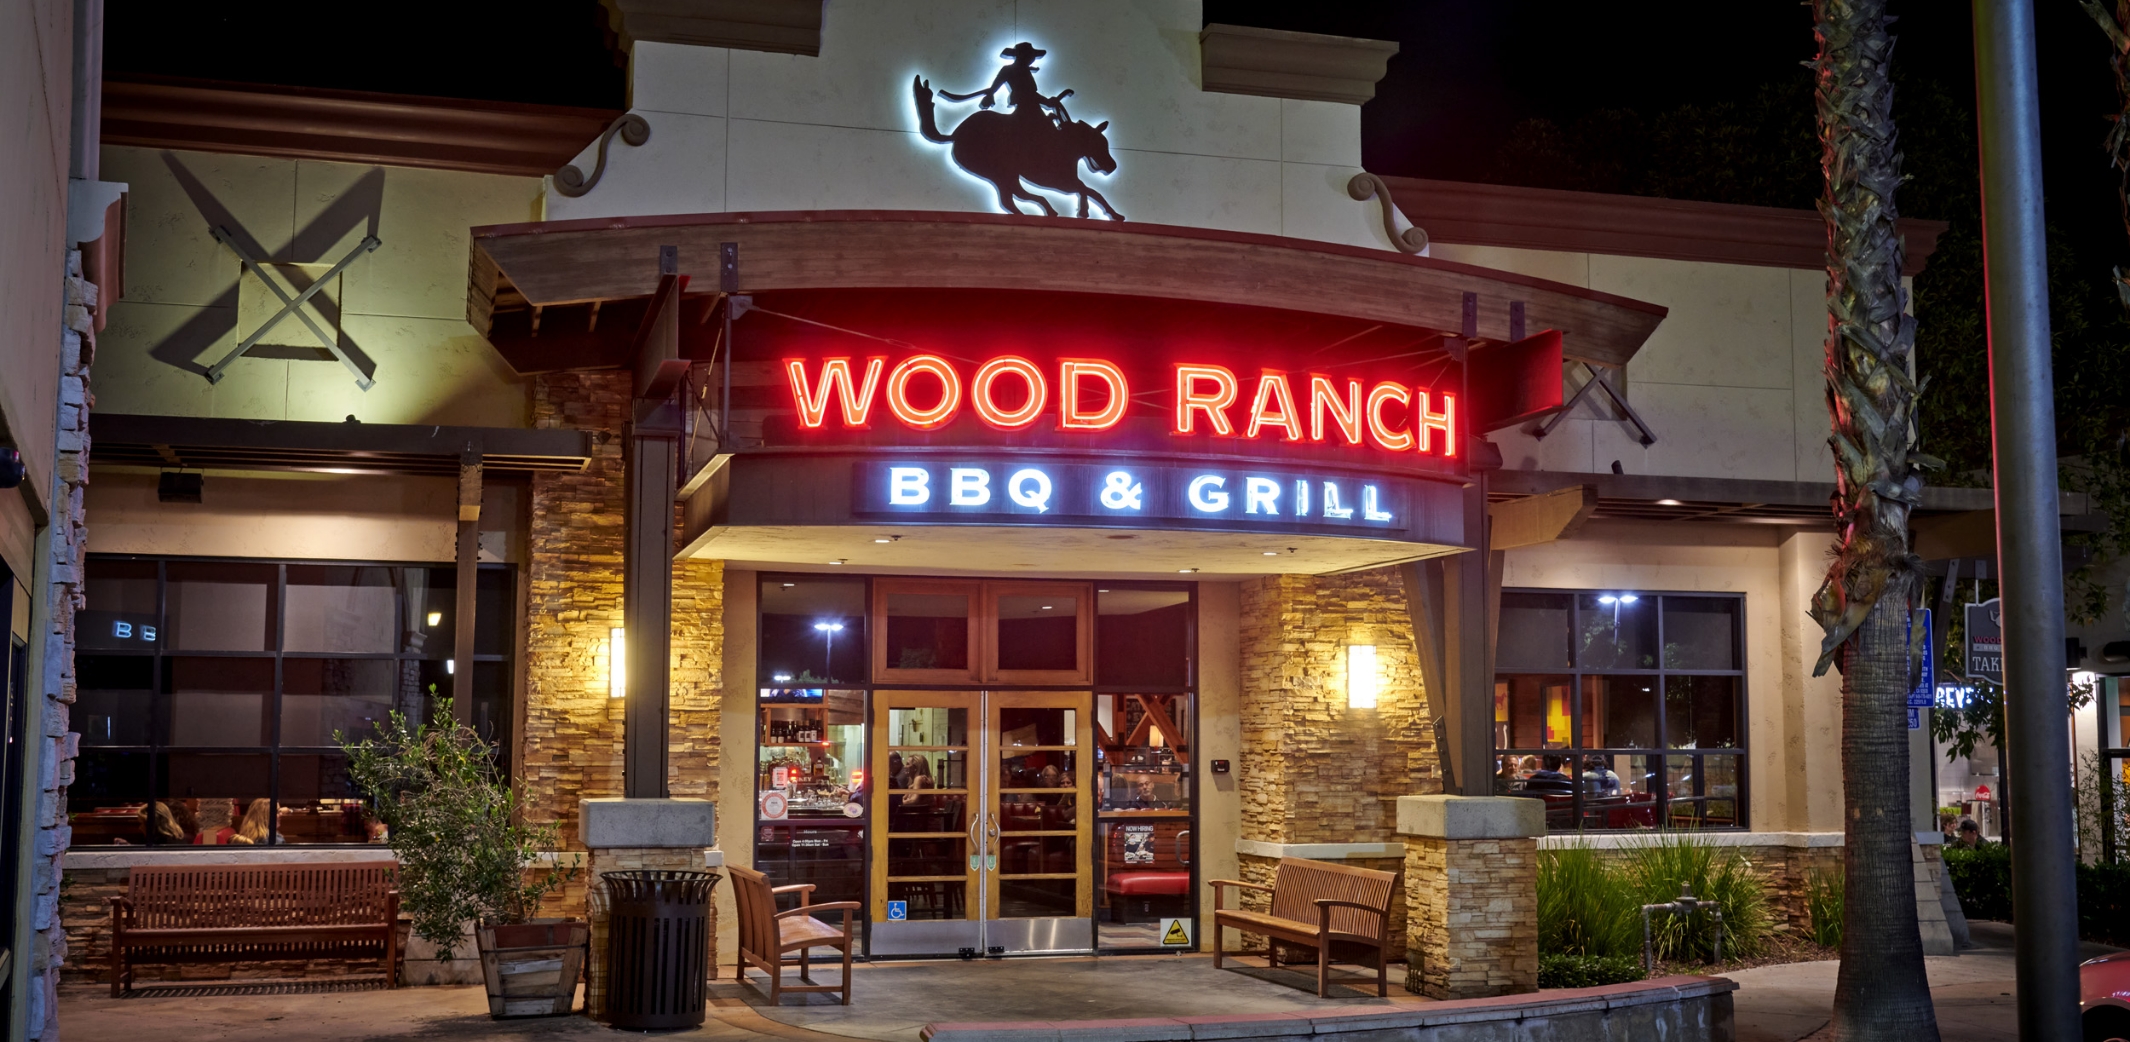 The inviting entrance of Wood Ranch BBQ & Grill Santa Margarita at night, featuring neon signage and a rustic stone facade, with guests arriving and departing under the soft glow of exterior lights.